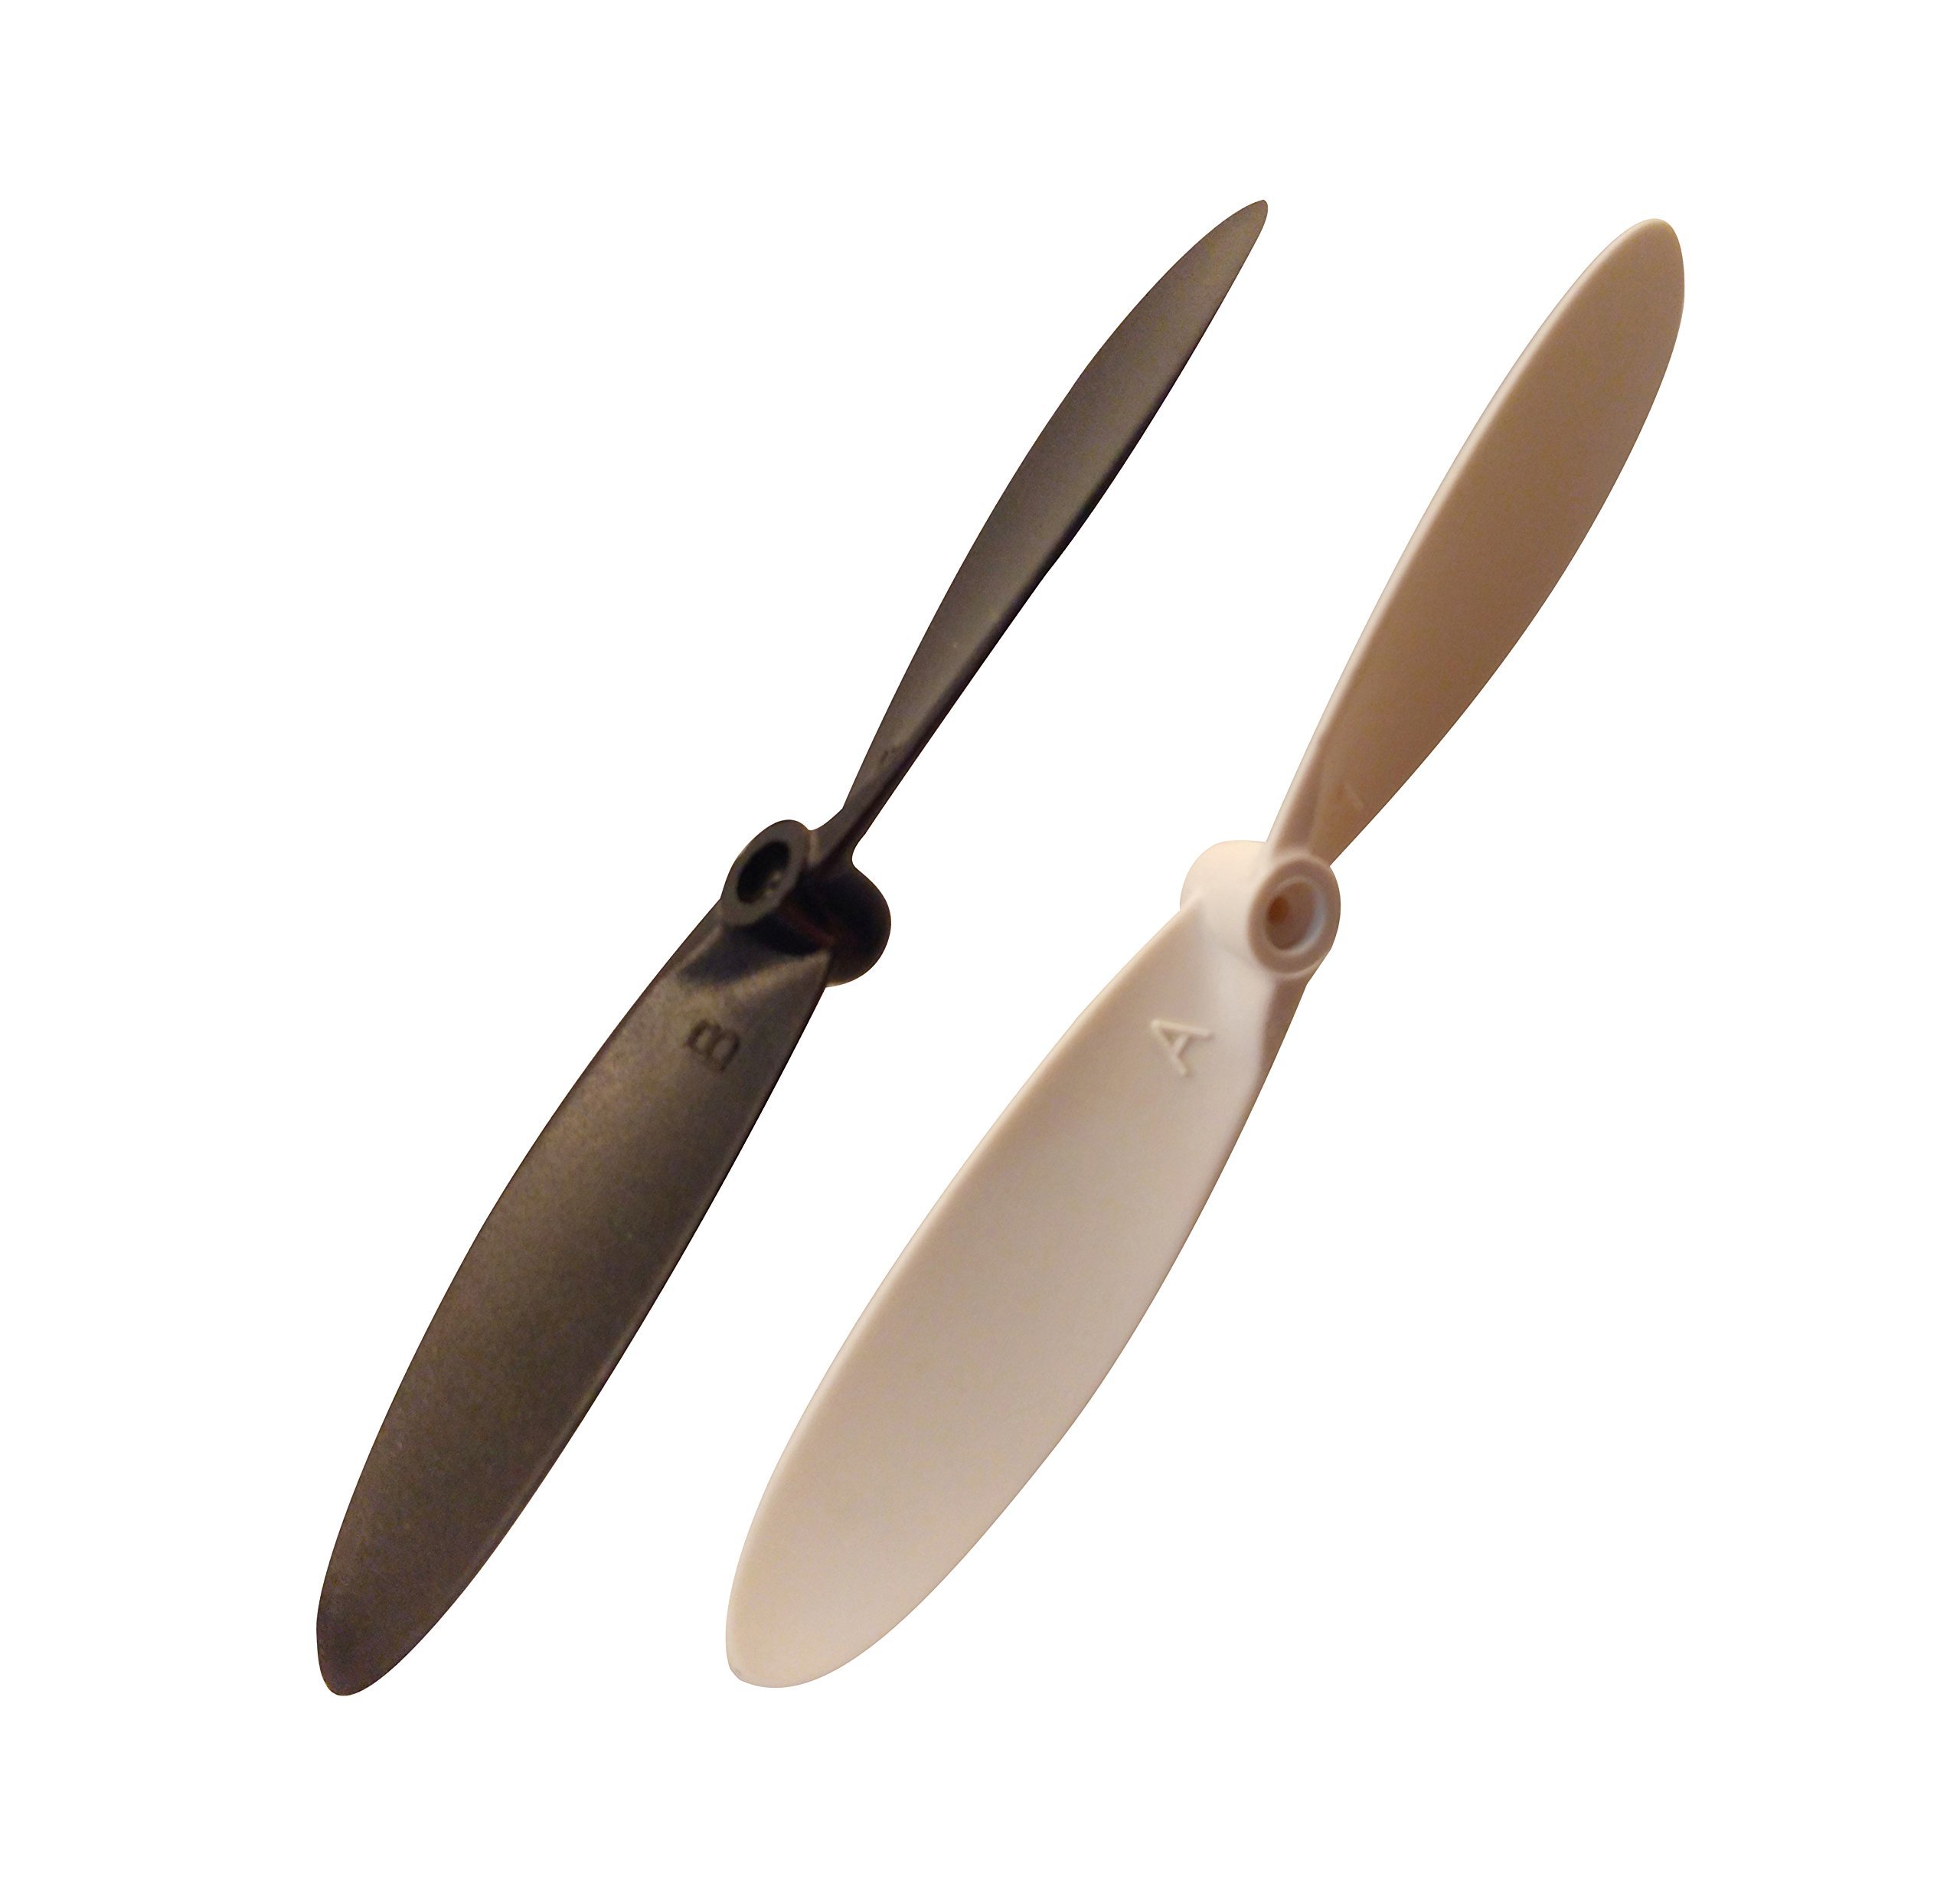 Holy Stone Blades Propellers for Hs170 F180 F180c Rc Quadcopter Helicopter Drone(20 Pieces) - $13.95